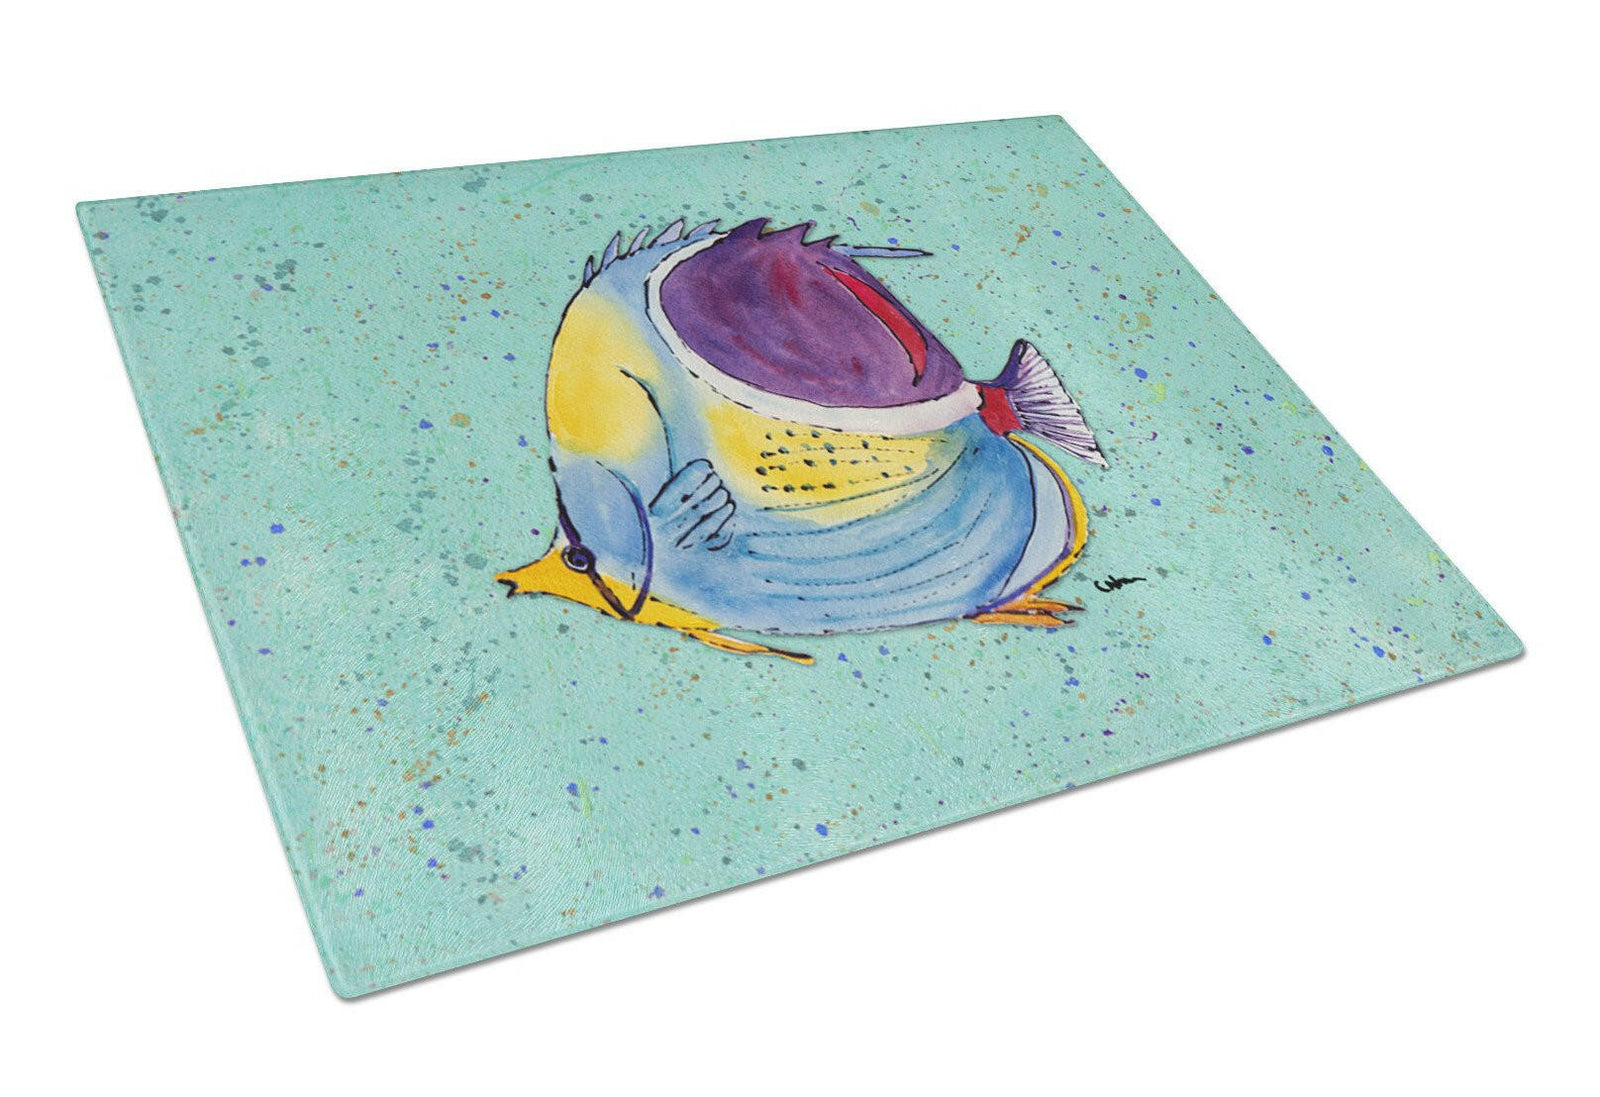 Tropical Fish on Teal Glass Cutting Board Large by Caroline's Treasures